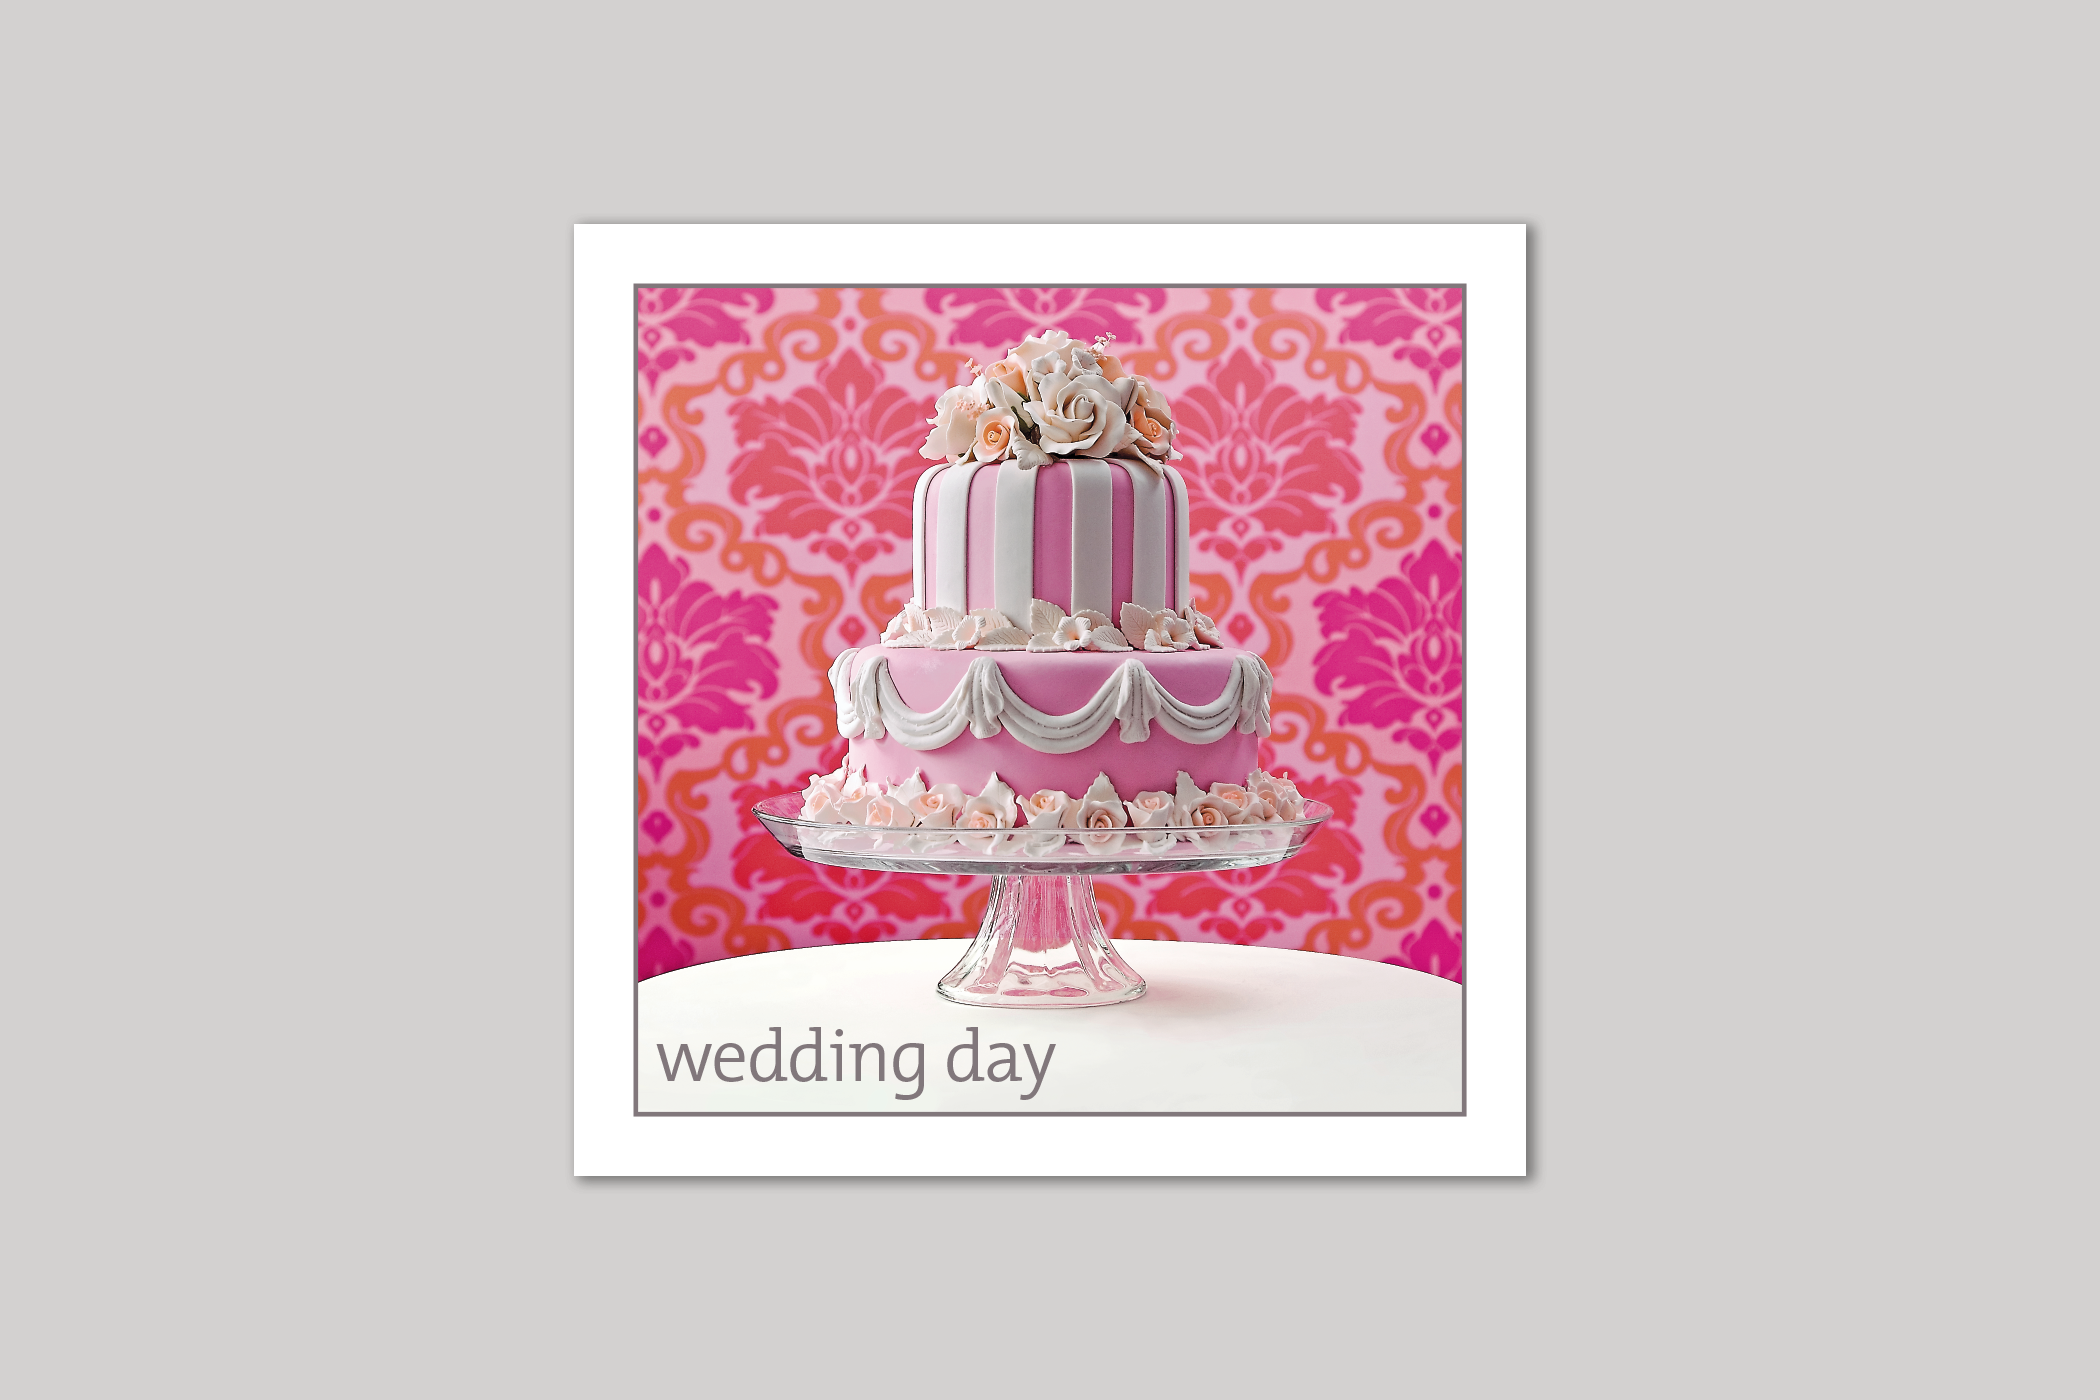 The Wedding Cake wedding card from Exposure Silver Edition range of greeting cards by Icon.